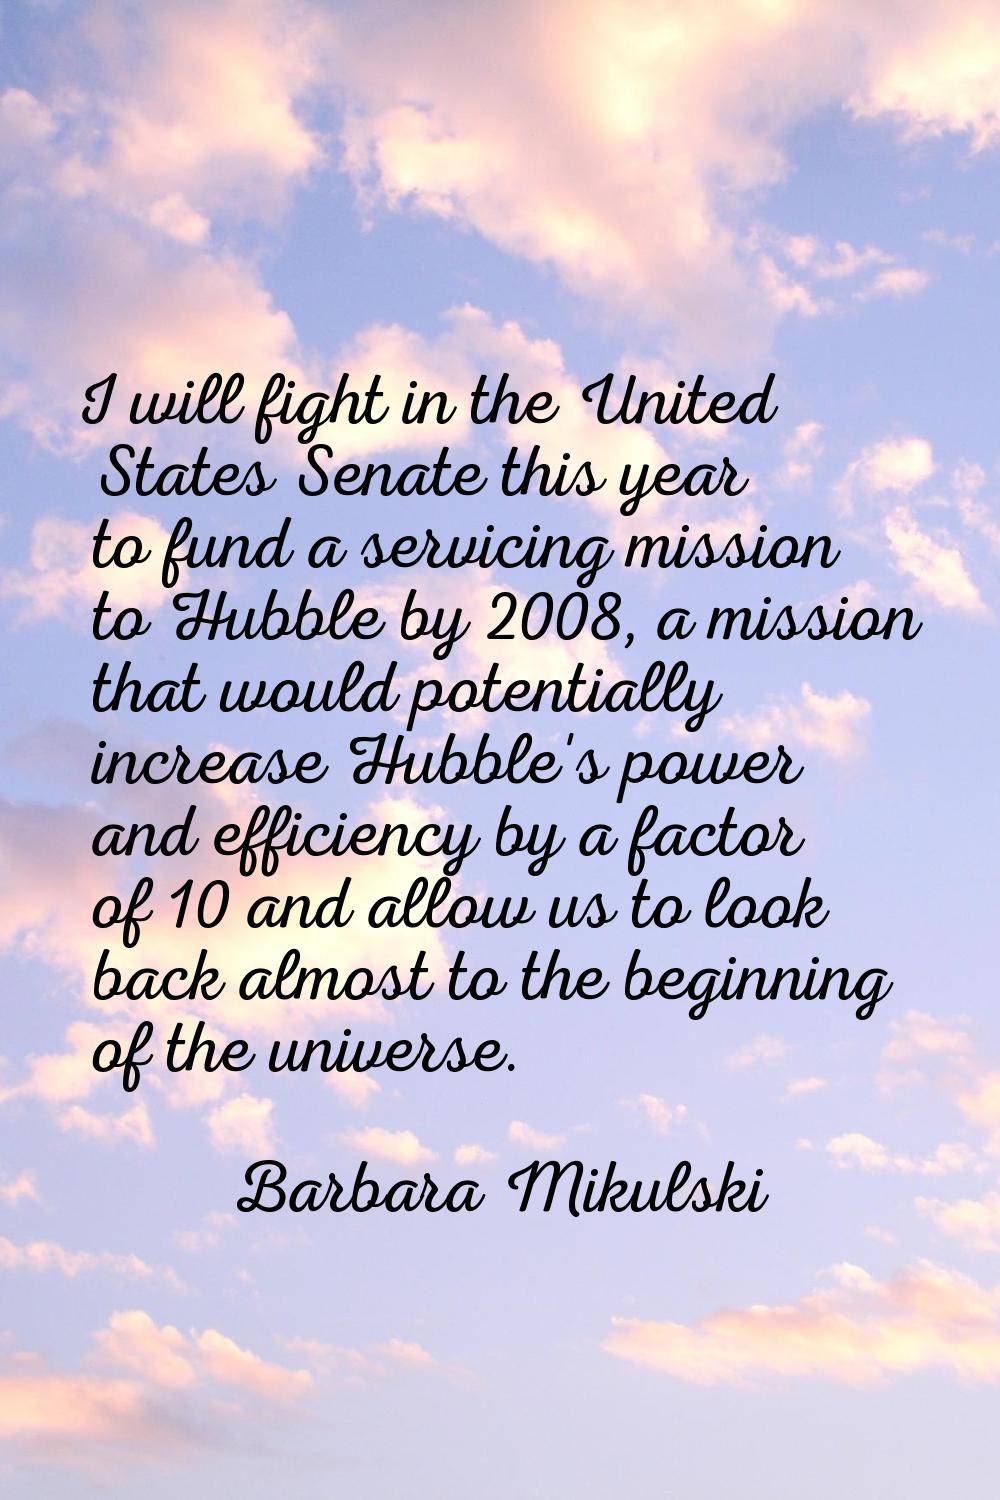 I will fight in the United States Senate this year to fund a servicing mission to Hubble by 2008, a